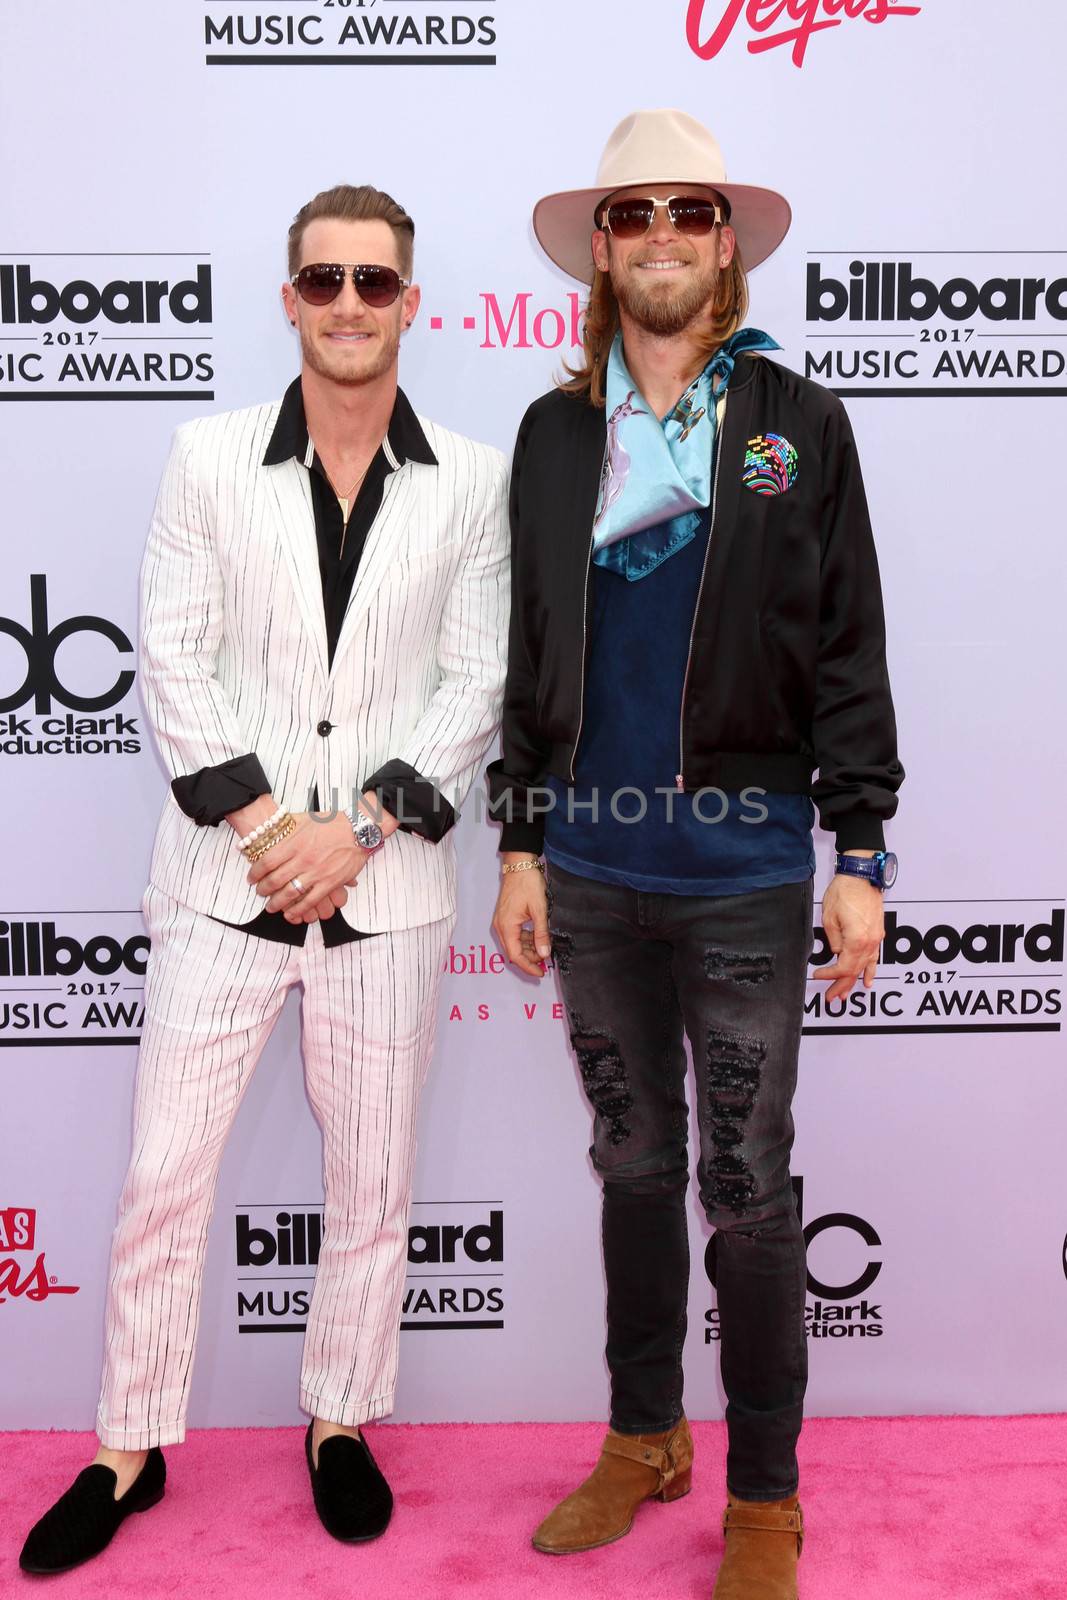 Florida Georgia Line, Tyler Hubbard, Brian Kelley
at the 2017 Billboard Awards Arrivals, T-Mobile Arena, Las Vegas, NV 05-21-17/ImageCollect by ImageCollect